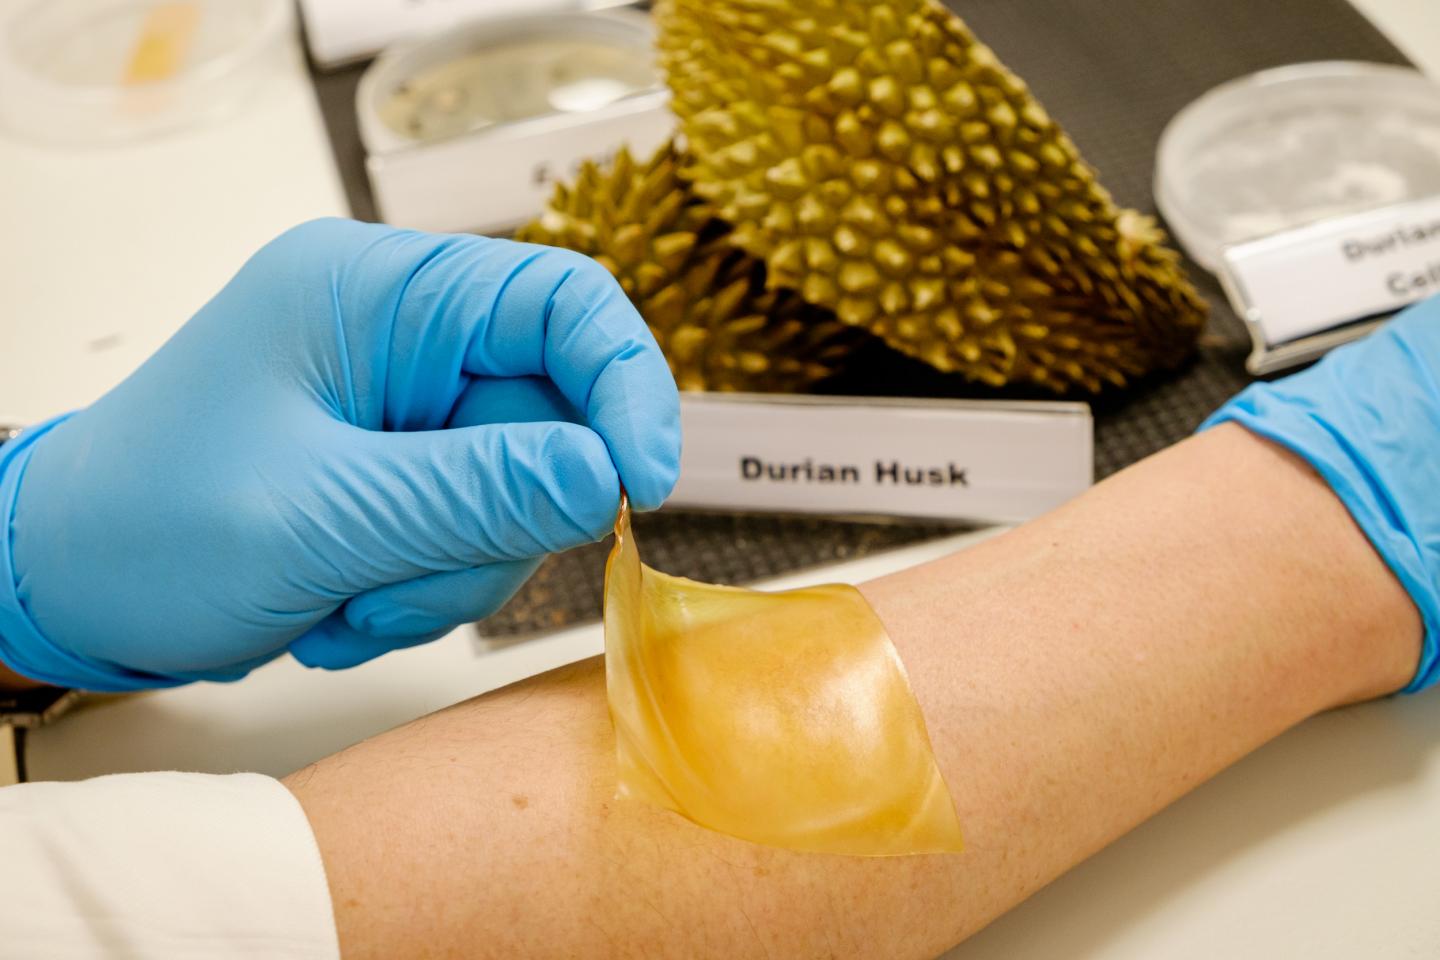 A New Hydrogel Patch Derived from Discarded Durian Husks Can Help Wounds to Heal Better